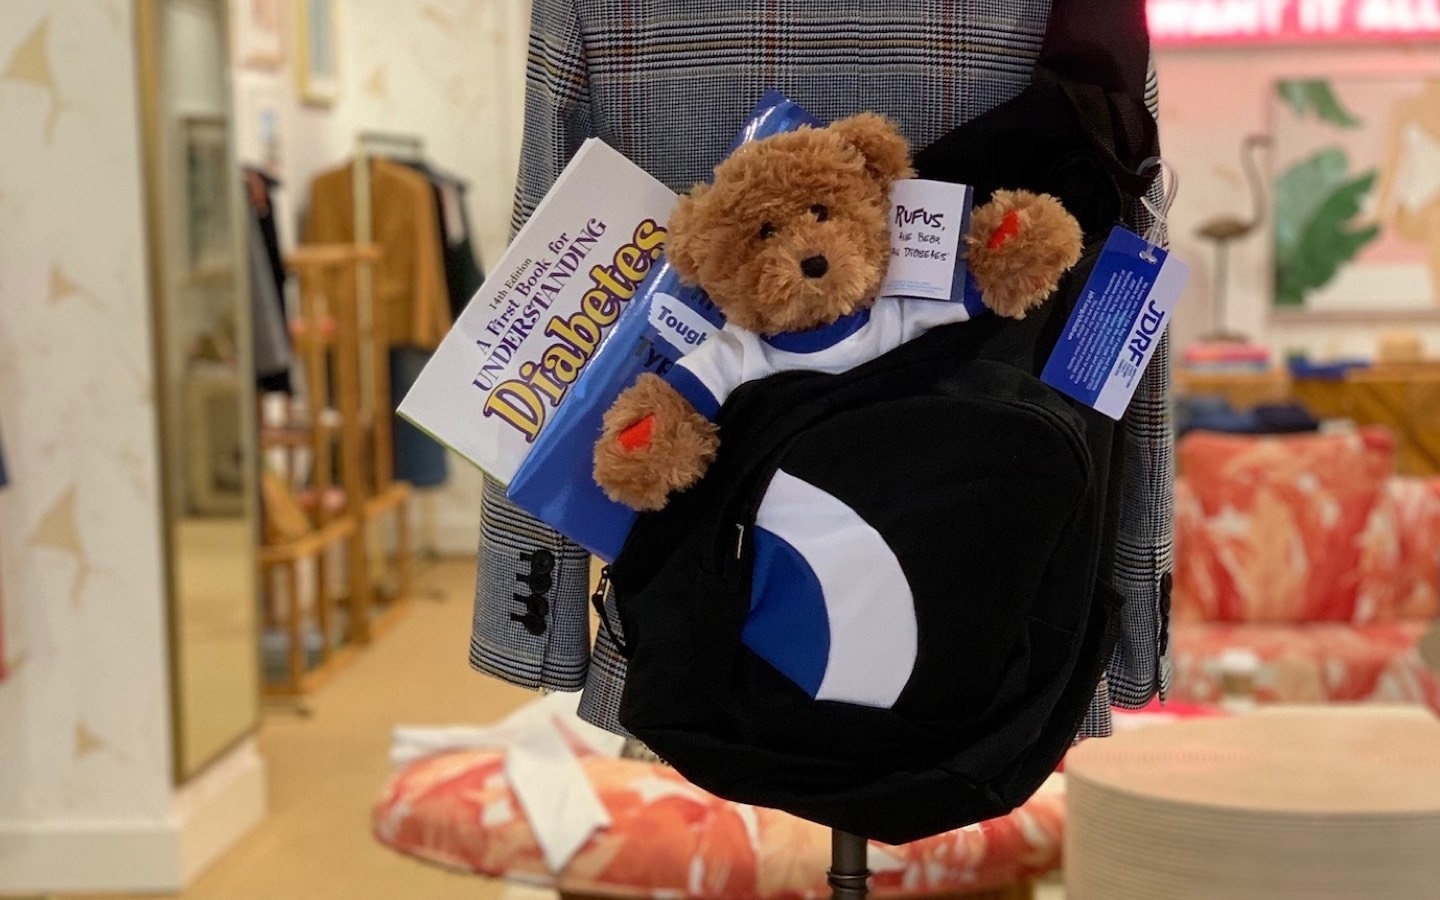 Photo of Rufus The Bear with Diabetes and other Bag of Hope items in a bookbag hanging in a Veronica Beard store.